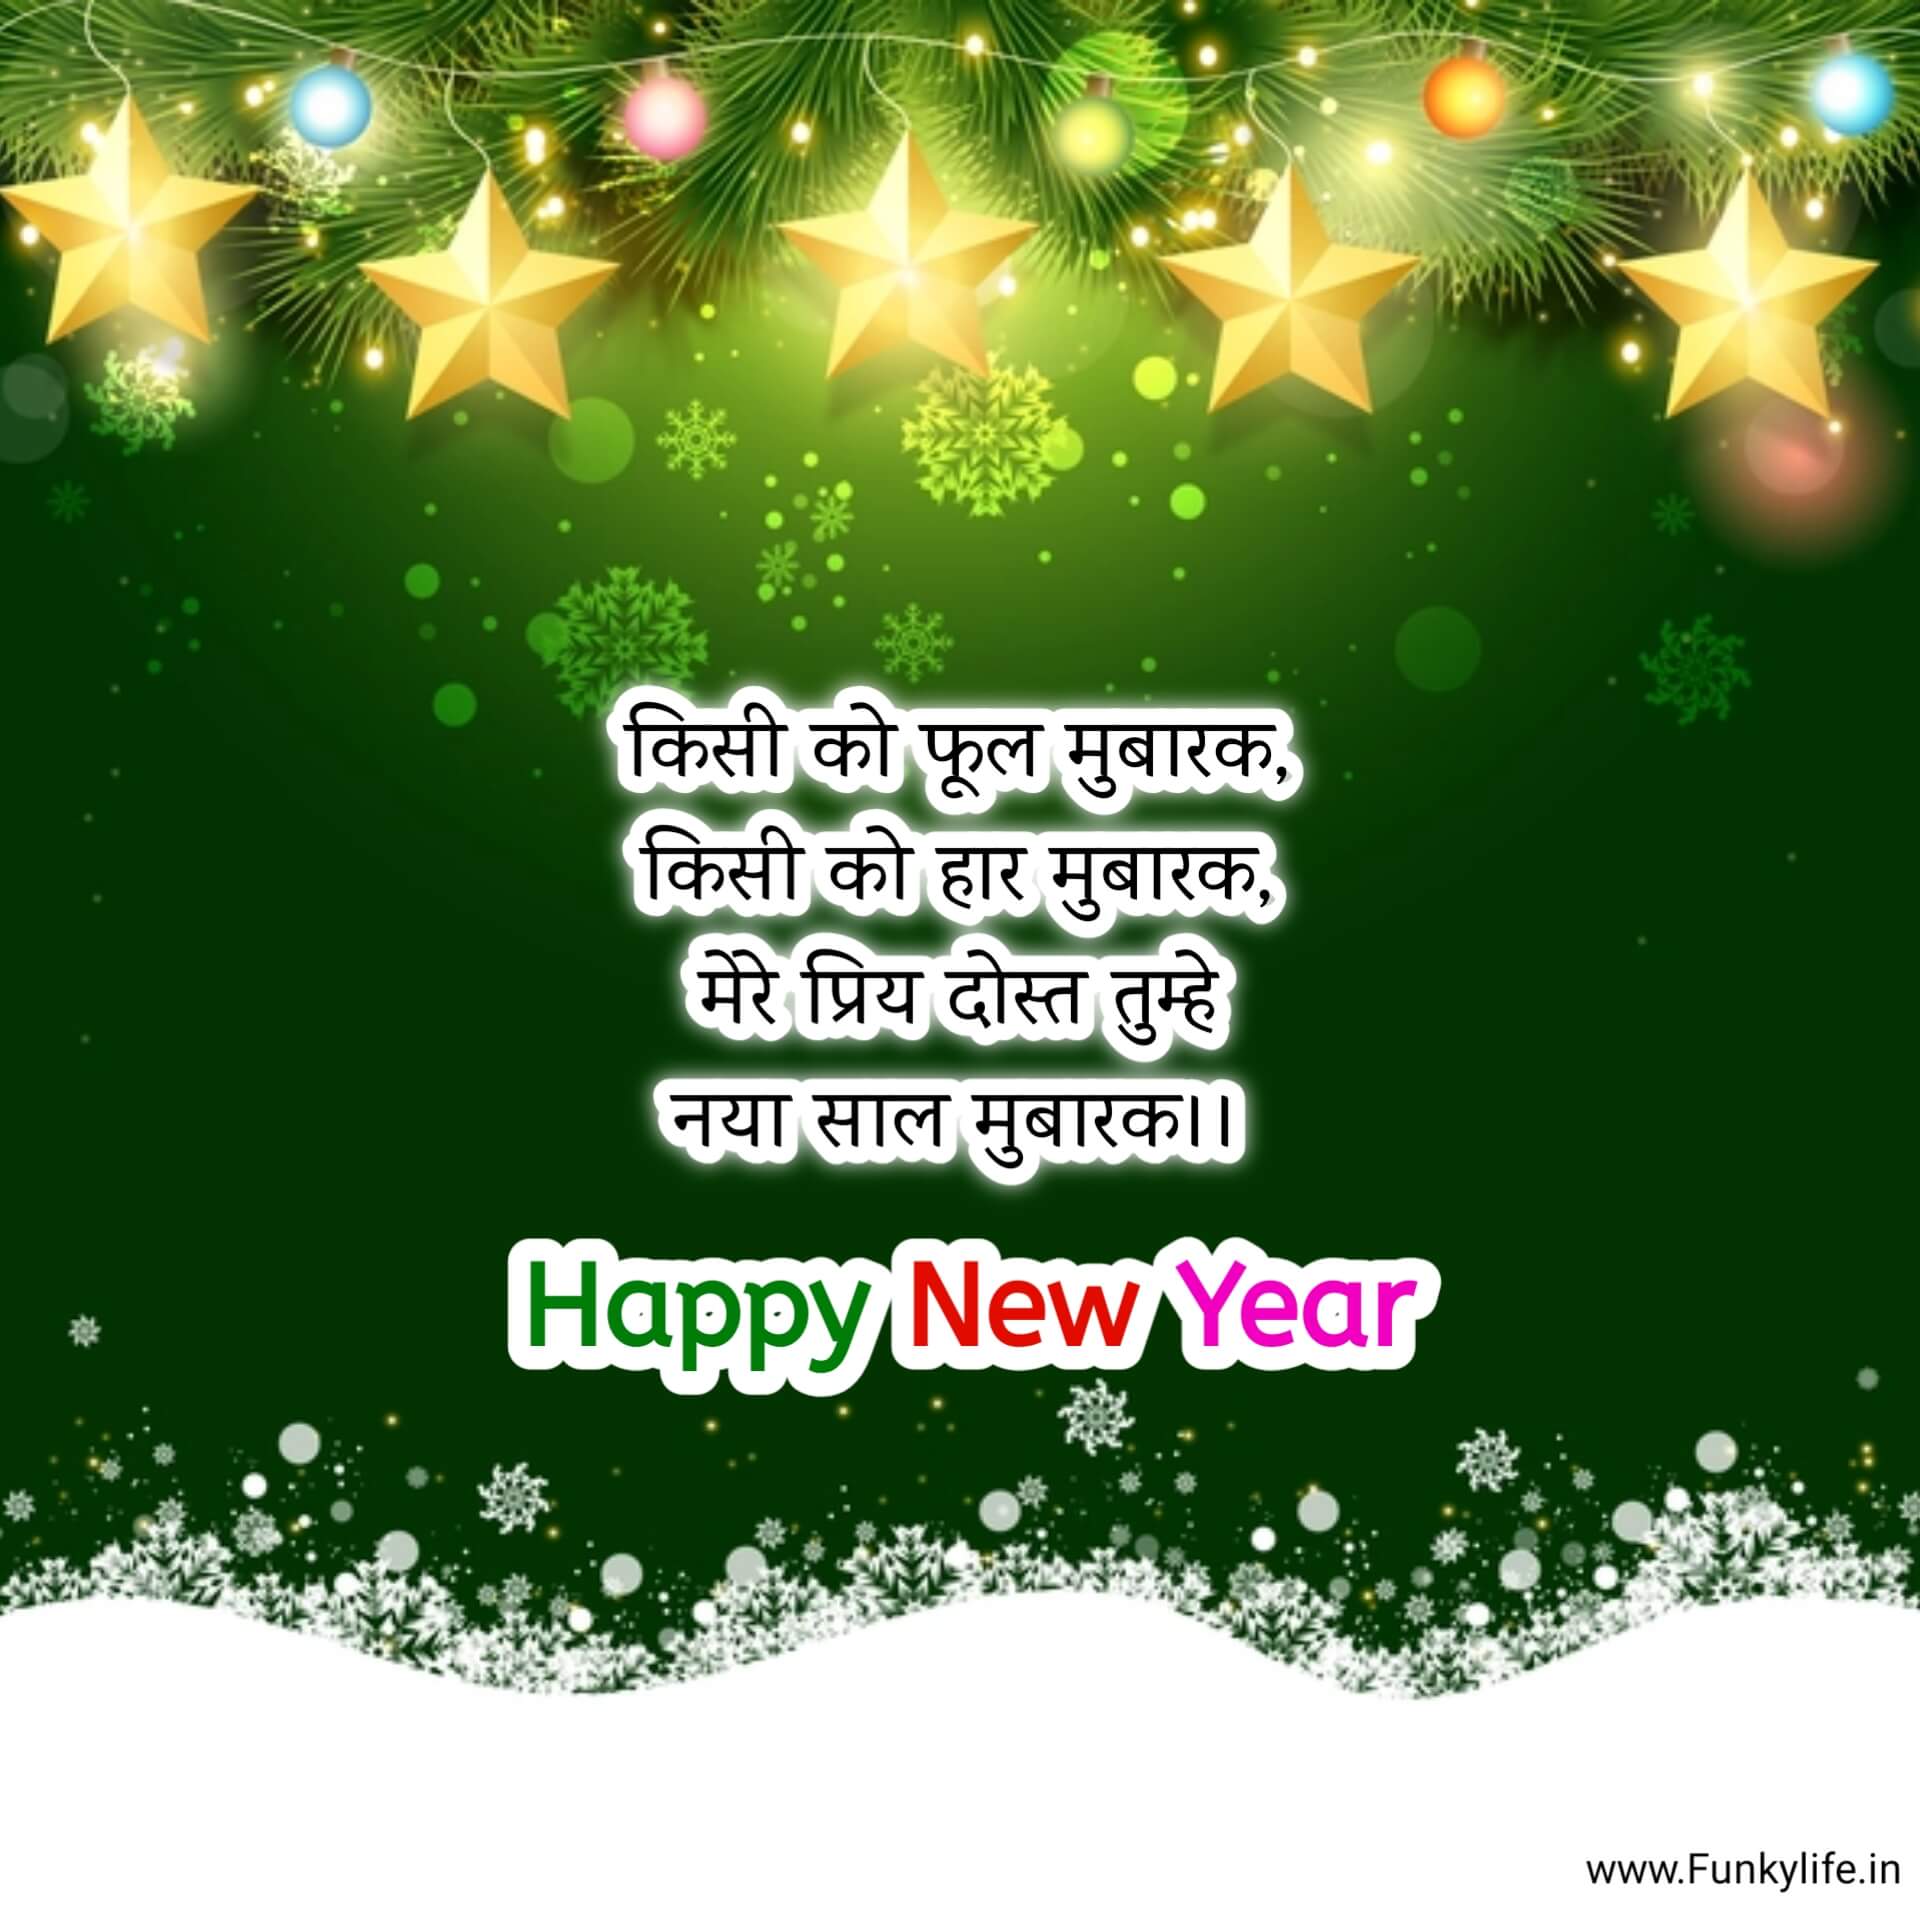 Happy New Year Wishes in Hindi for Friend